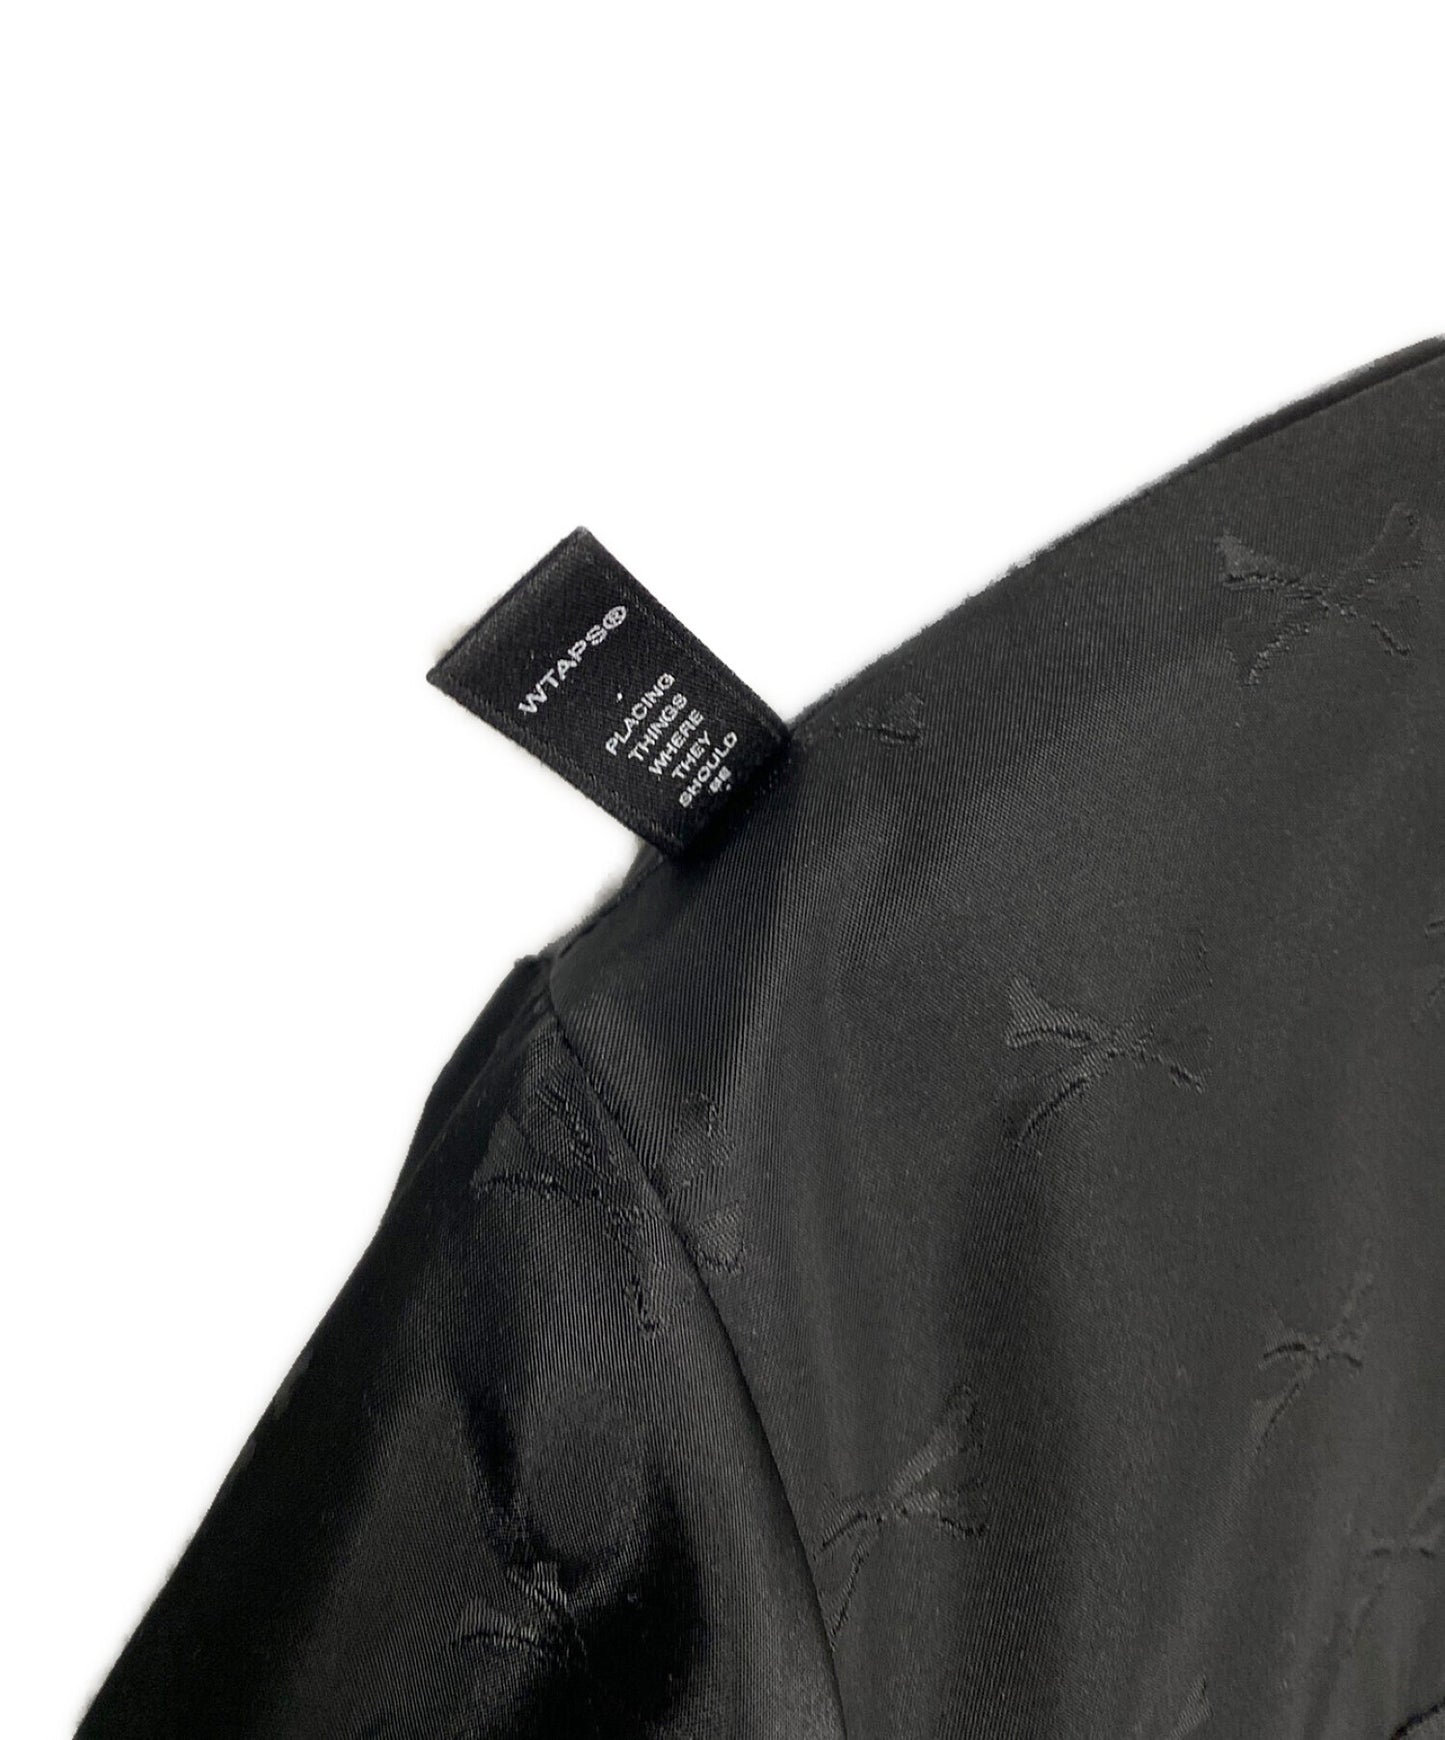 [Pre-owned] WTAPS TEAM JACKET 162GWDT-JKM01S